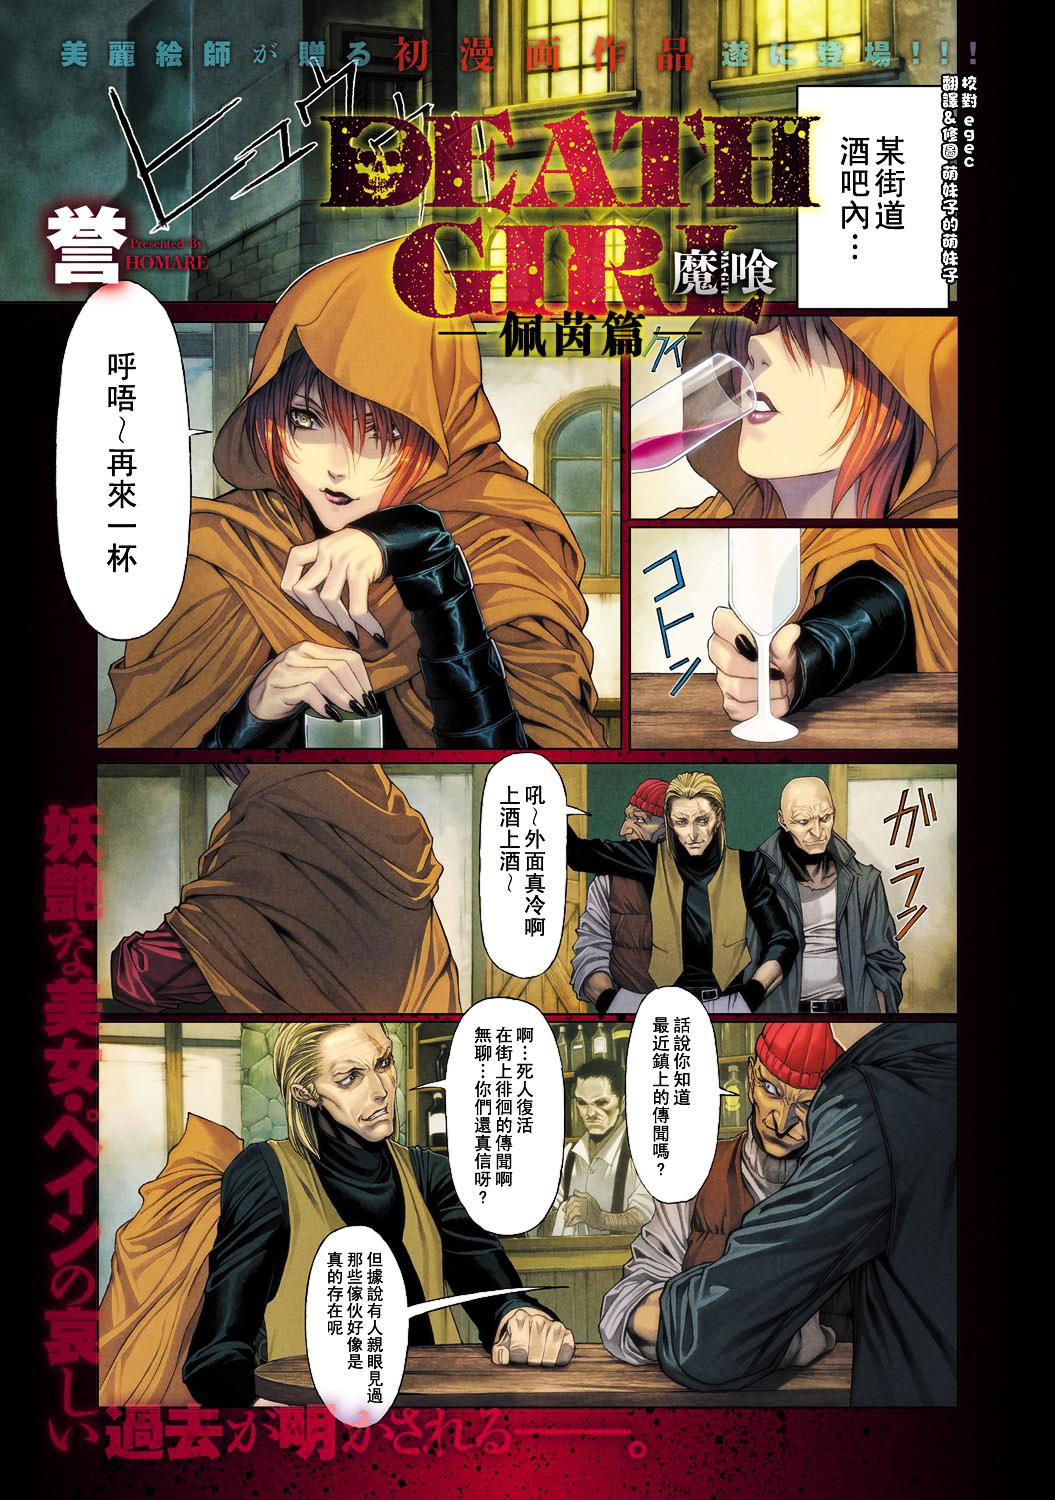 [Homare] Ma-Gui -DEATH GIRL- Pain Hen (COMIC Anthurium 015 2014-07) [Chinese] [里界漢化組] [Digital] 0